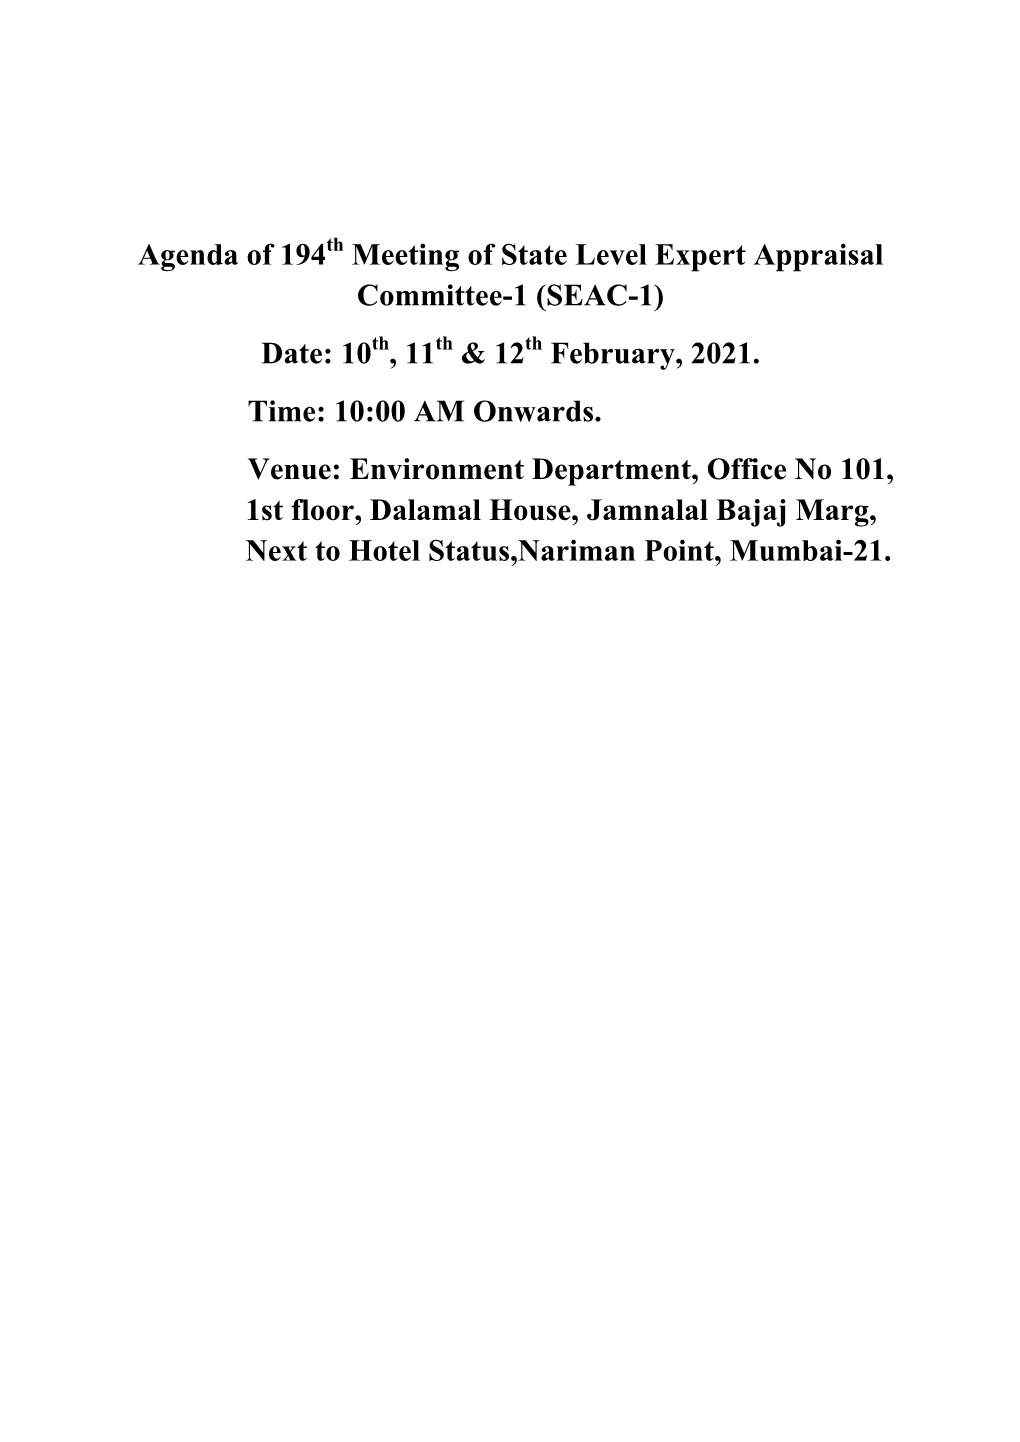 Agenda of 194 Meeting of State Level Expert Appraisal Committee-1 (SEAC-1) Date: 10 , 11 & 12 February, 2021. Time: 10:00 AM